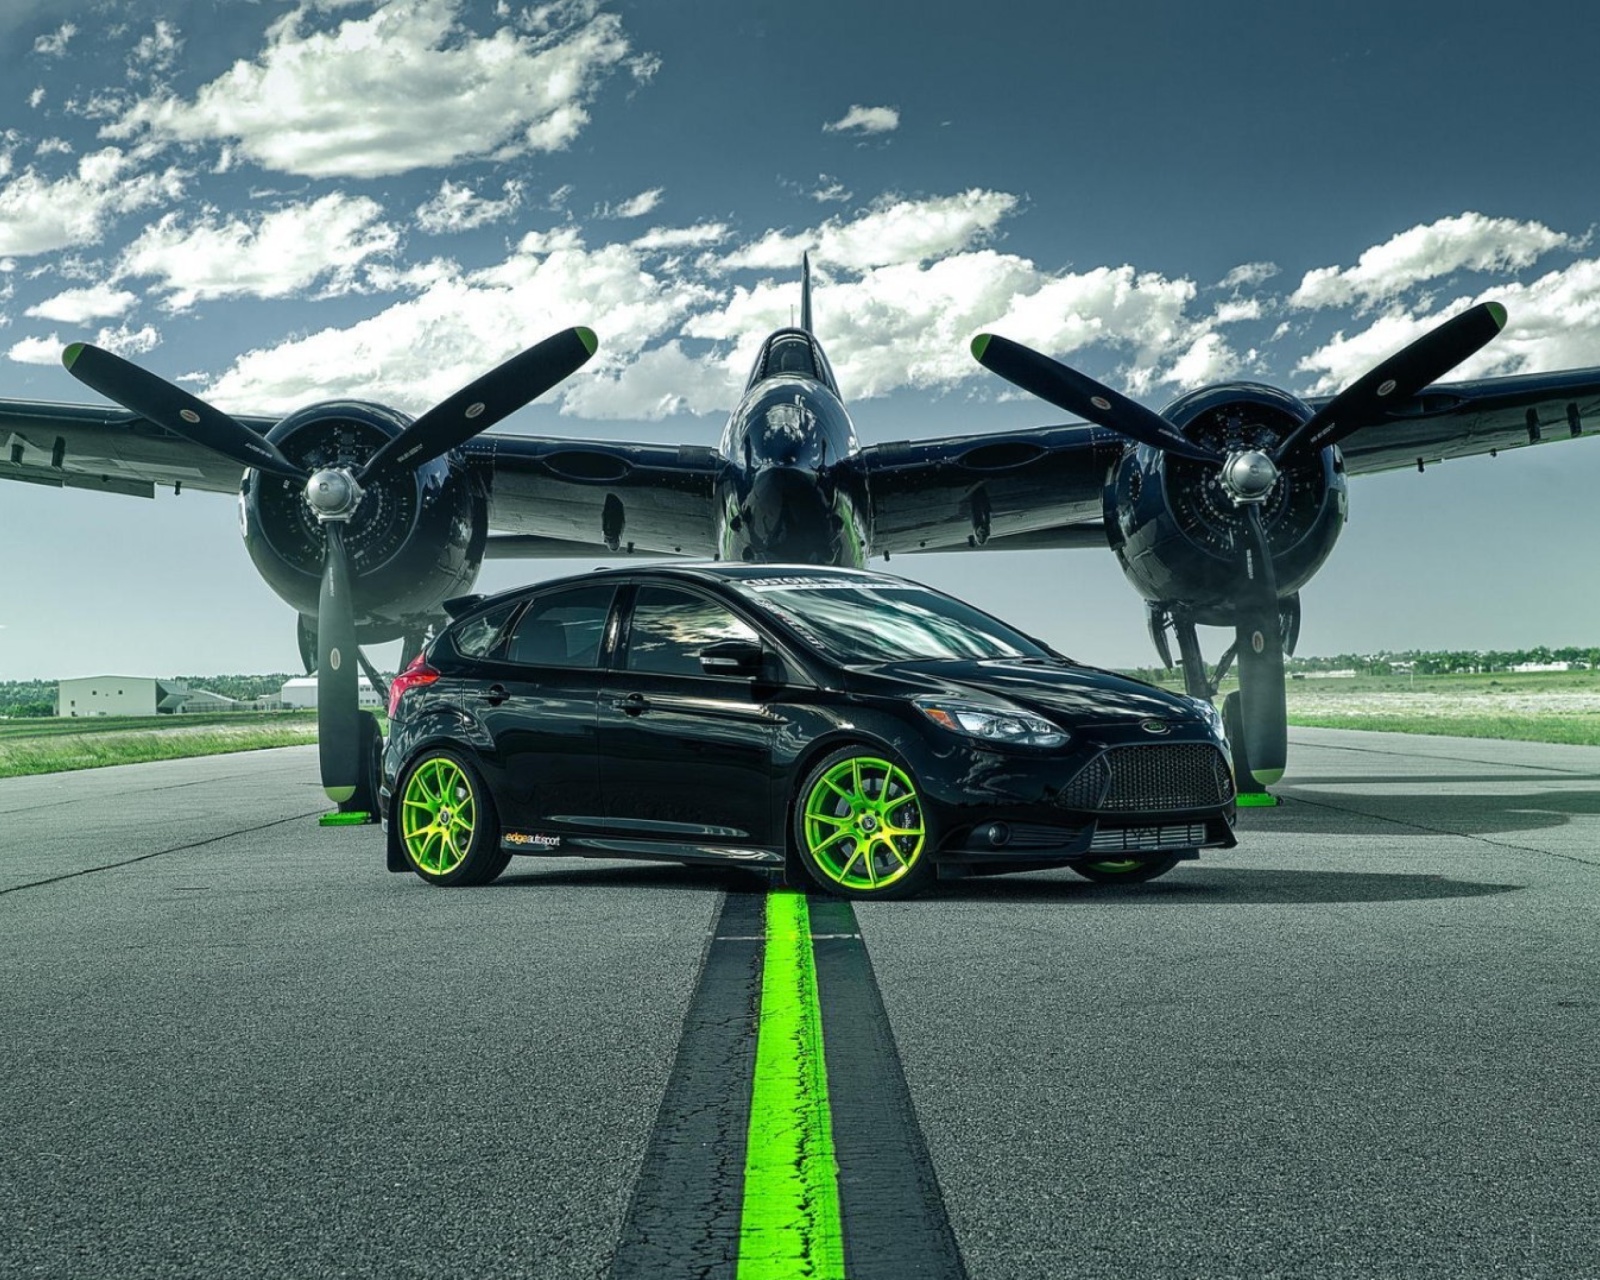 Das Ford Focus ST with Jet Wallpaper 1600x1280